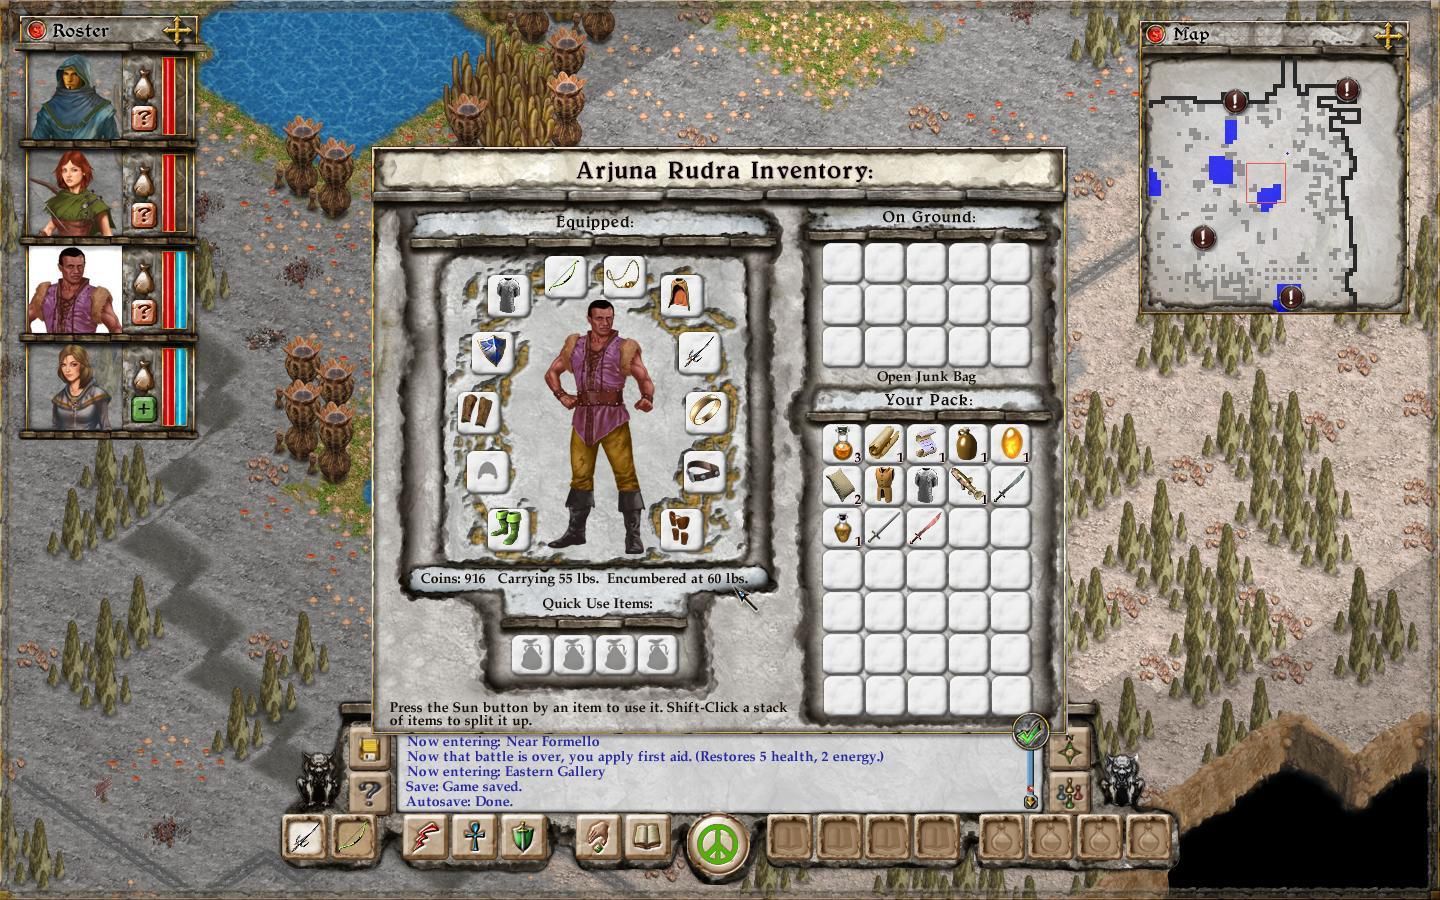 Avernum Escape From the Pit instaling